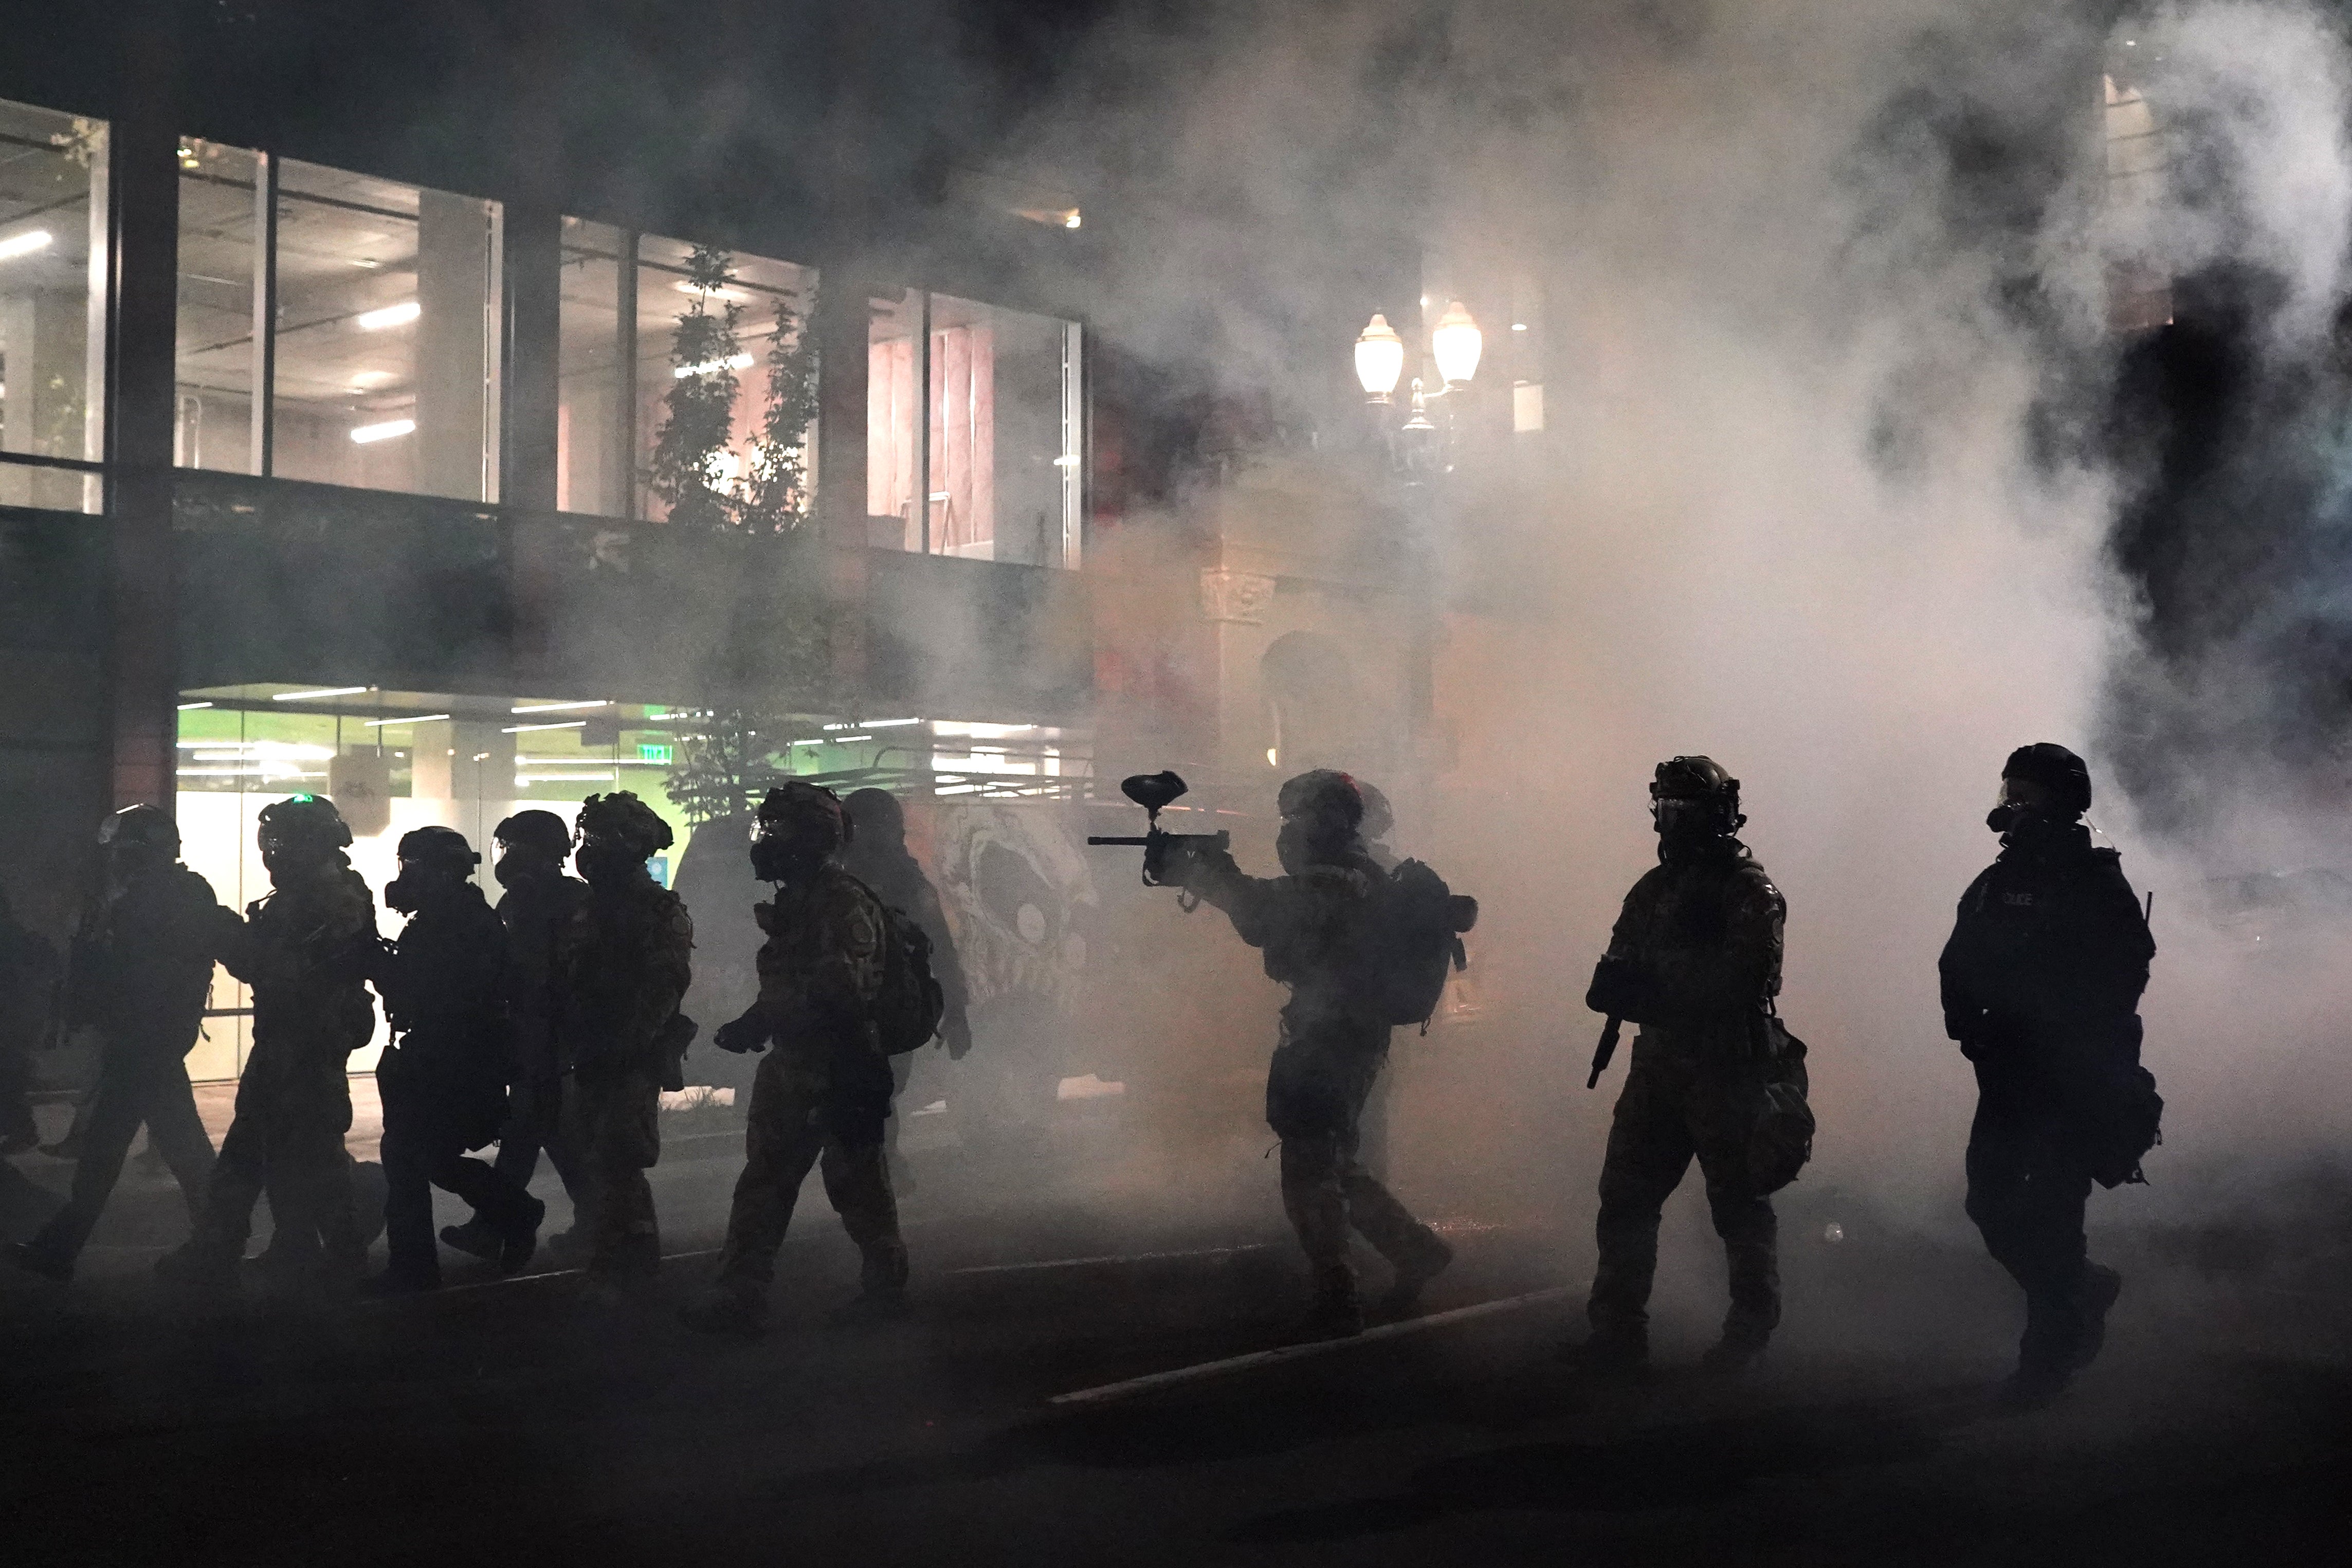 Law enforcement fired tear gas at demonstrators in Portland, Oregon, among many cities that saw the use of tear gas over several months of protests in 2020.